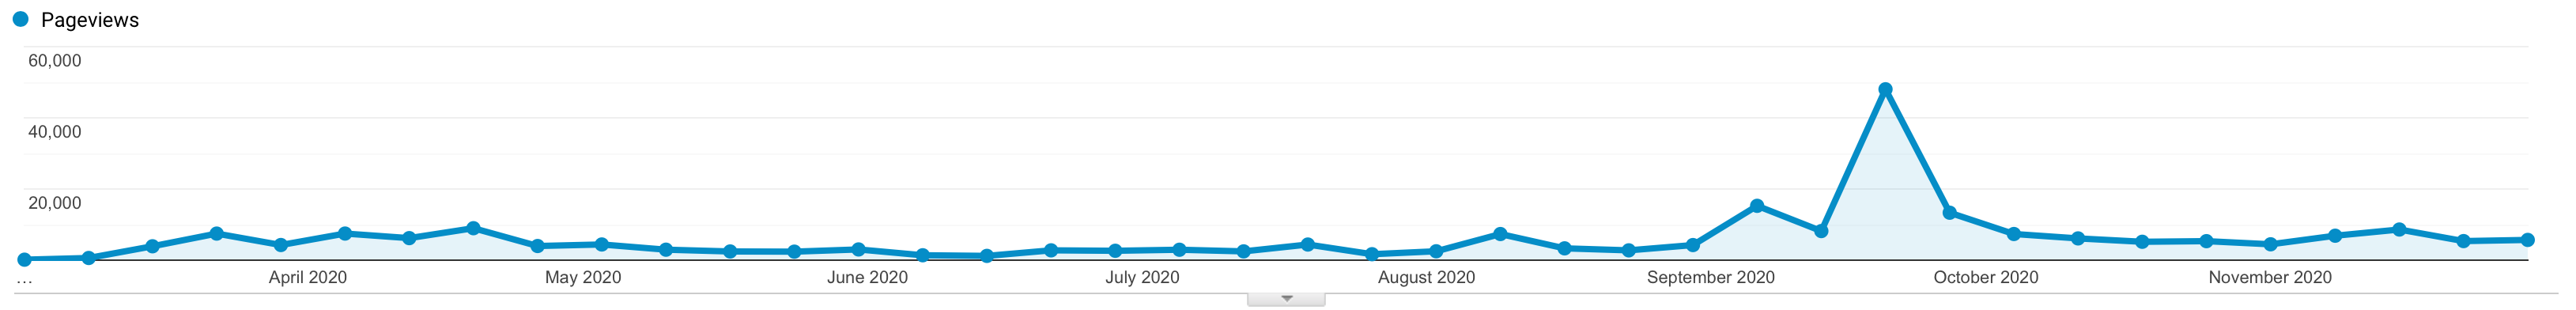 Weekly pageviews for Irrational Exuberance.